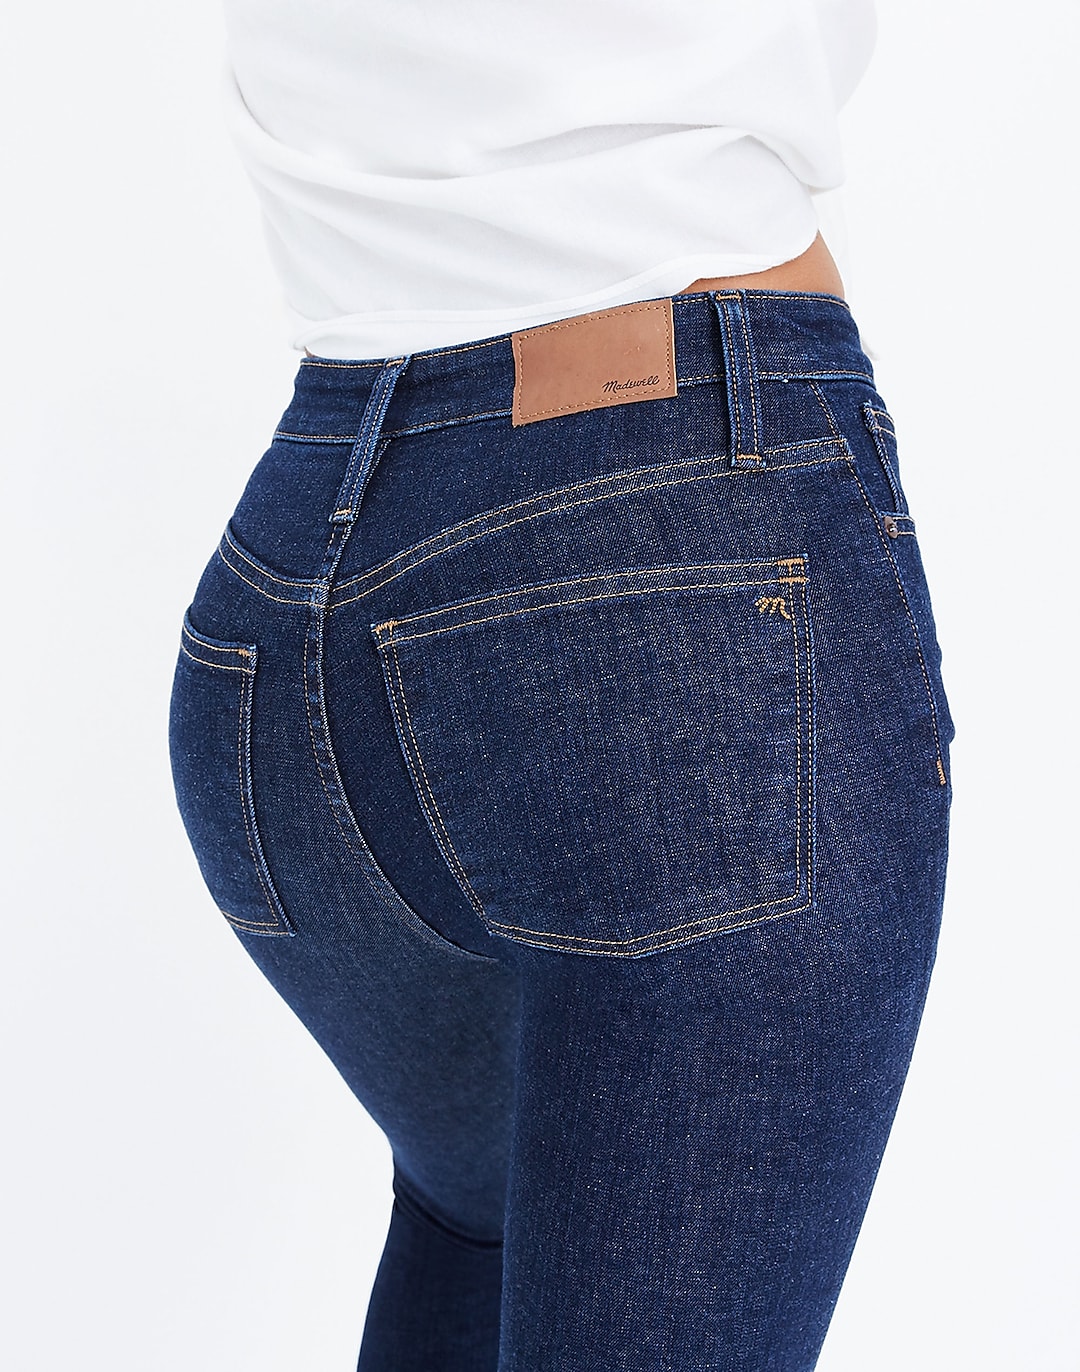 spyd Logisk Tranquility Women's Curvy High-Rise Skinny Jeans in Lucille Wash | Madewell